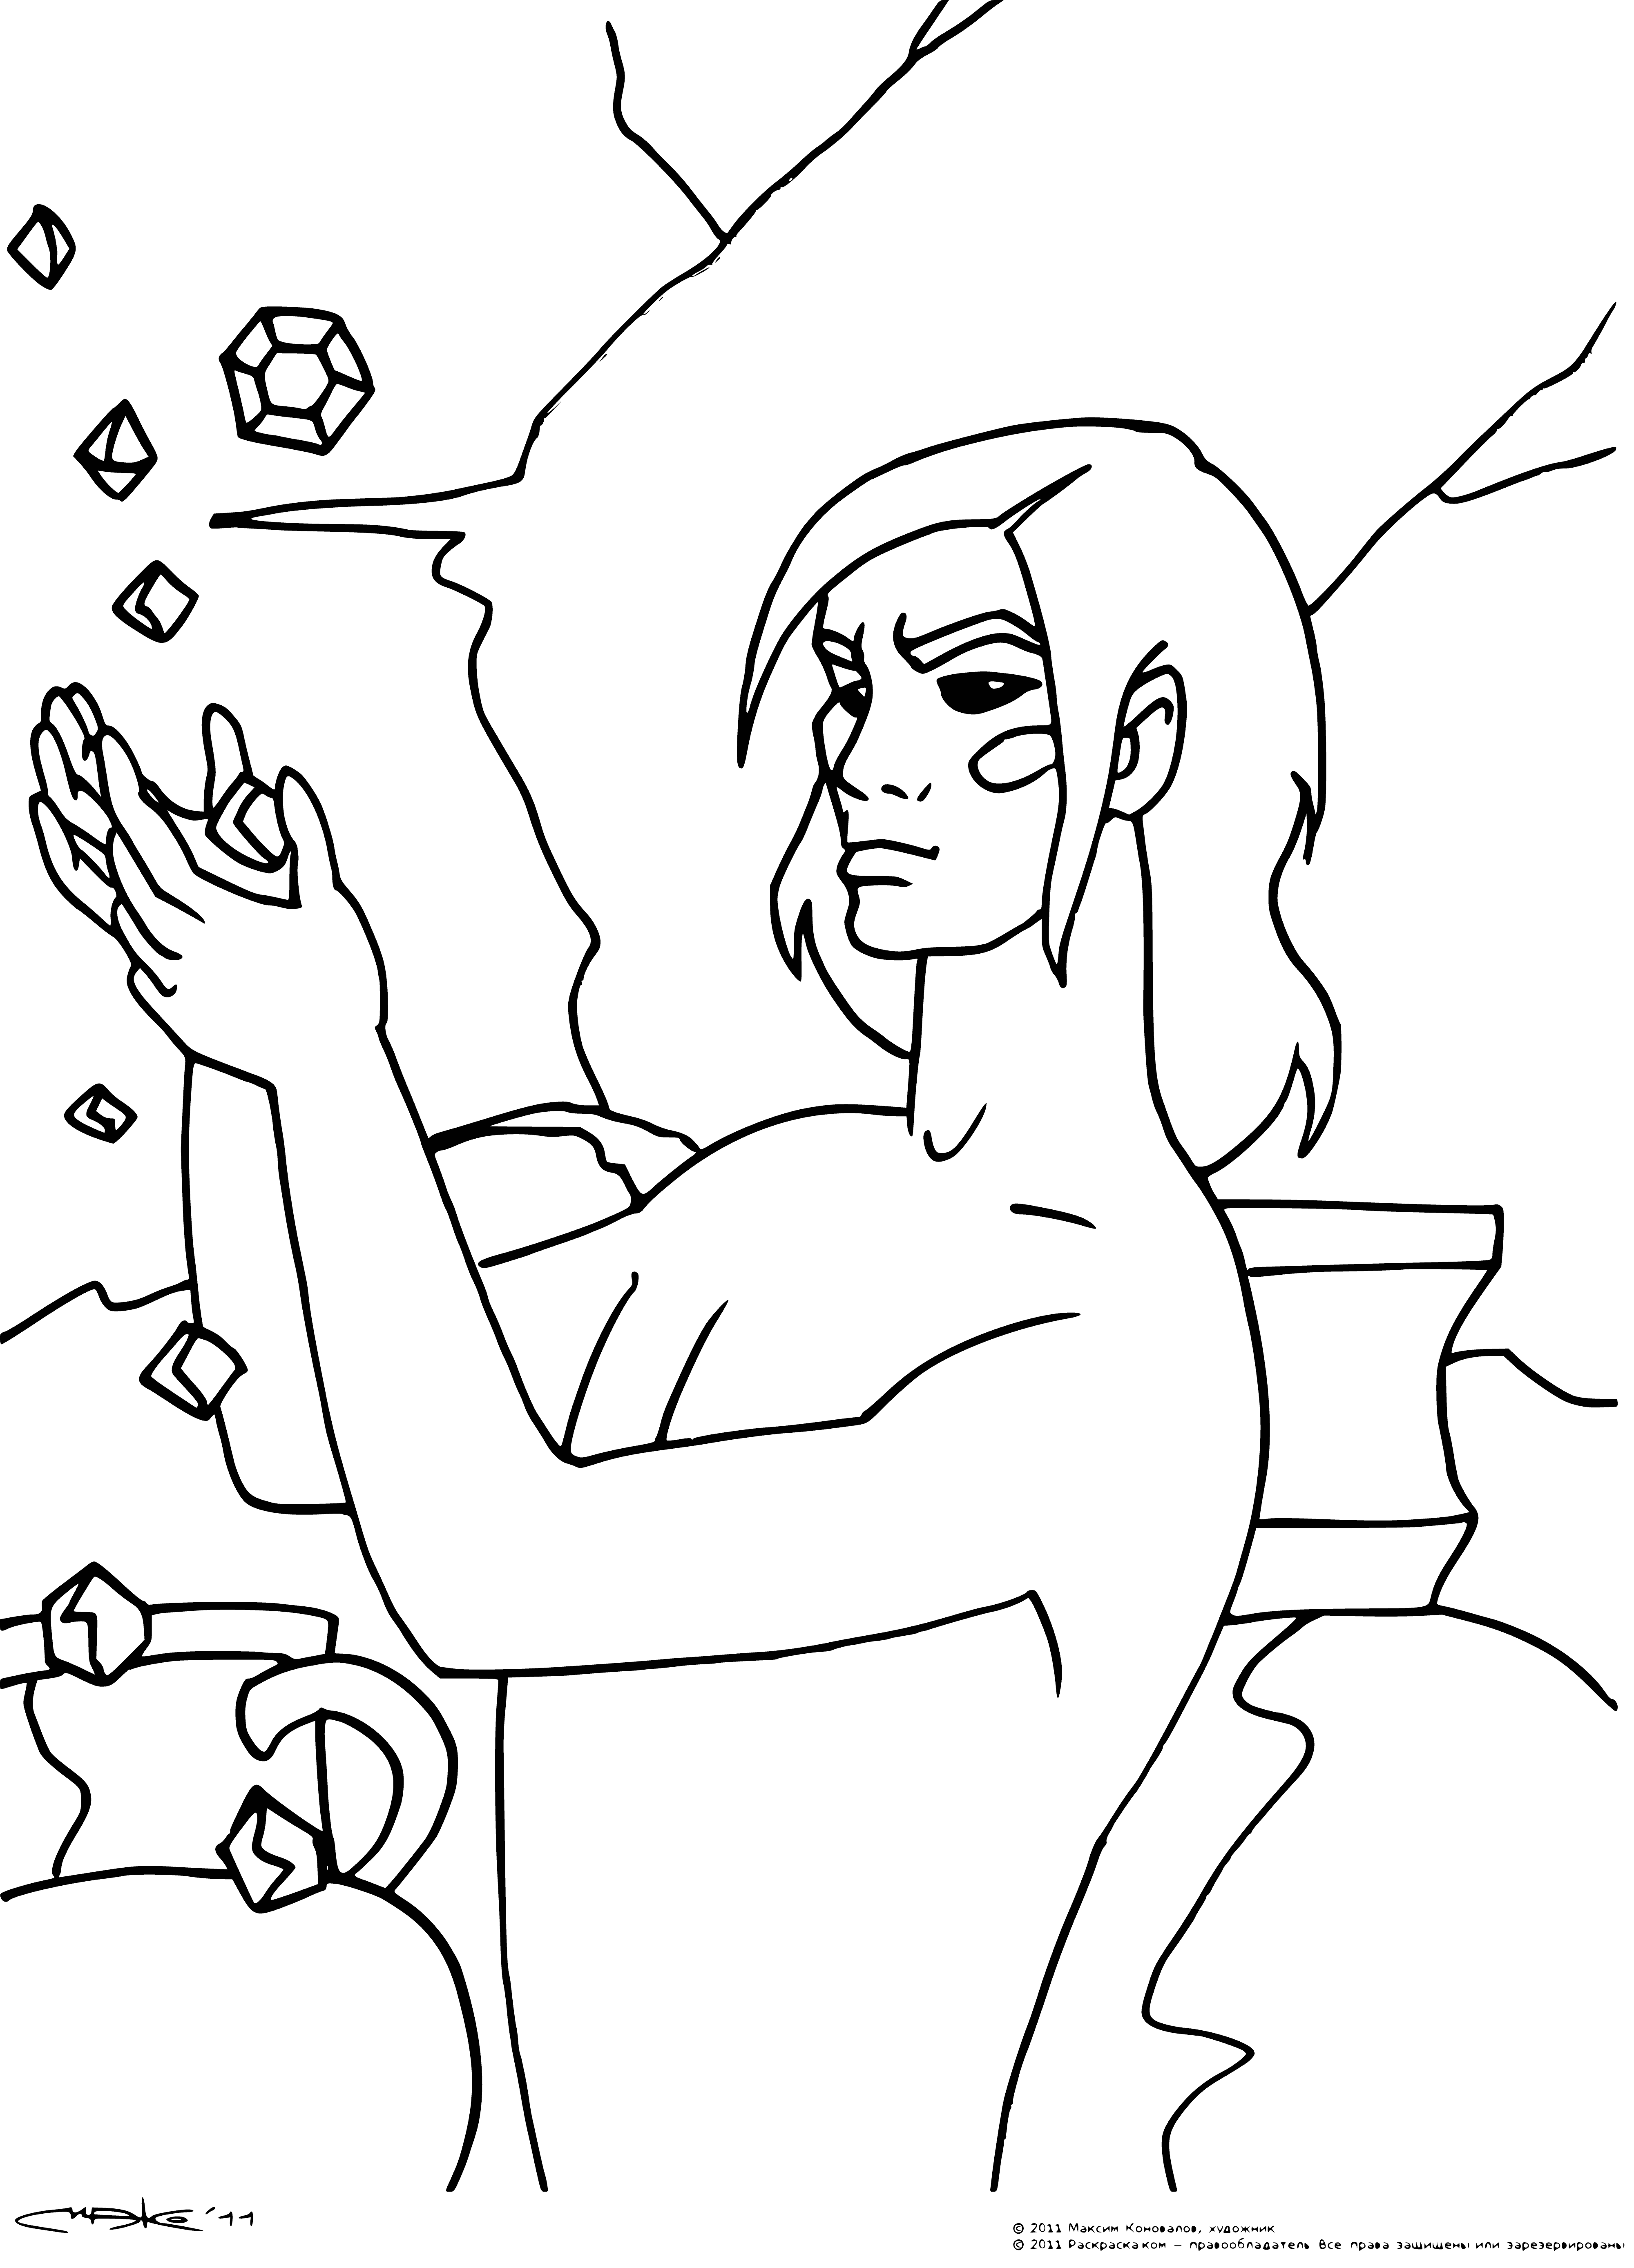 coloring page: Mowgli stands smiling before a chest full of coins and jewels.